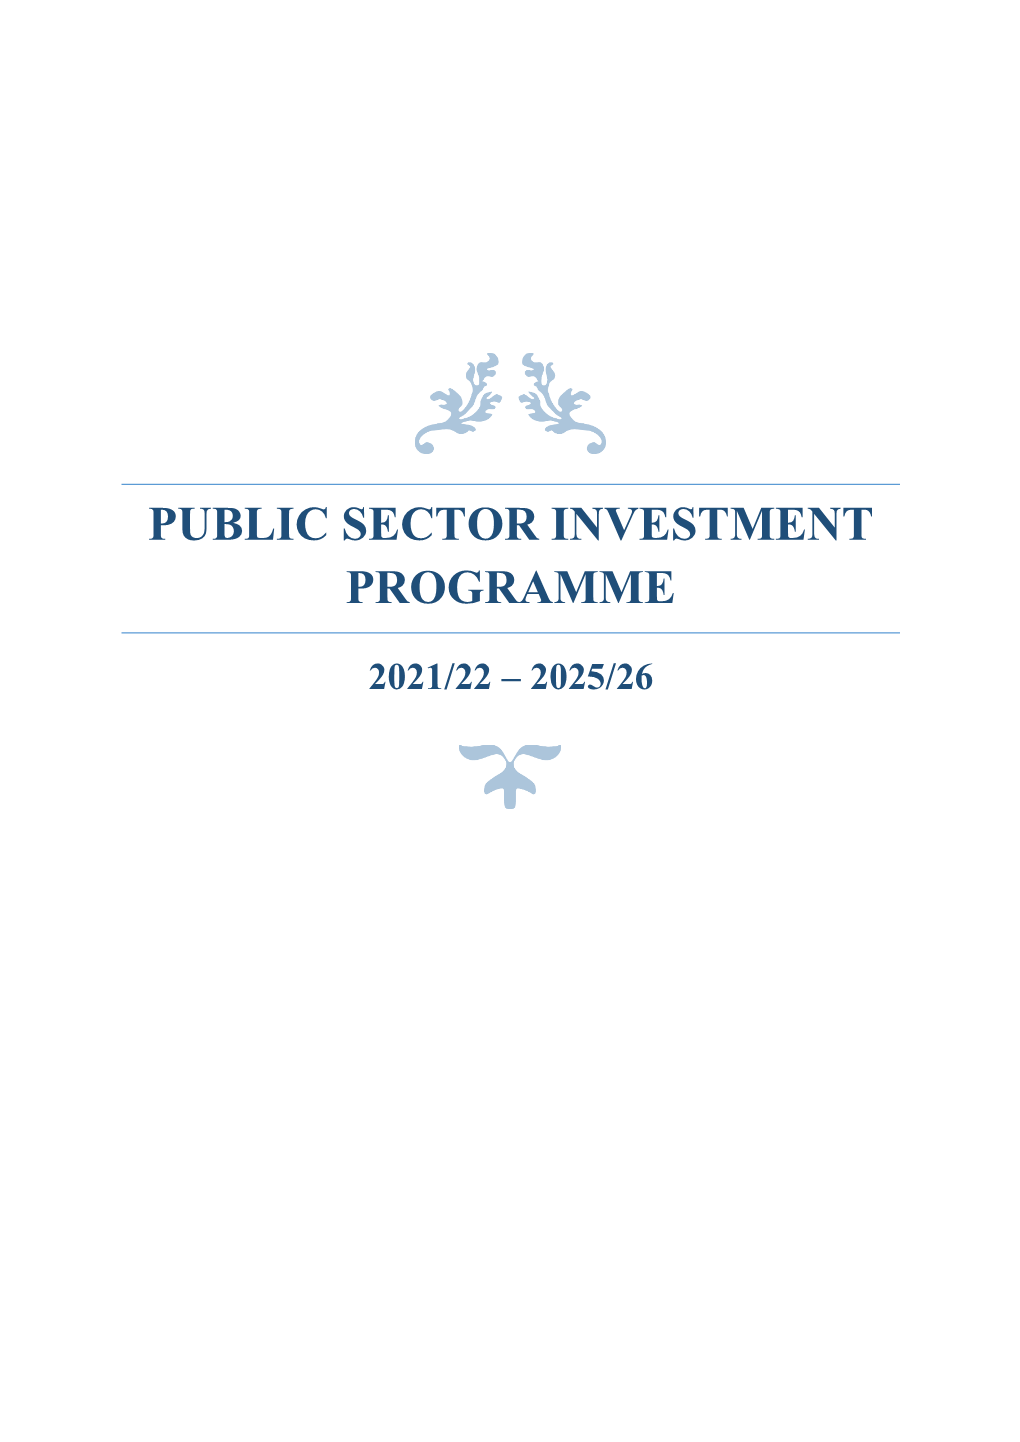 Public Sector Investment Programme